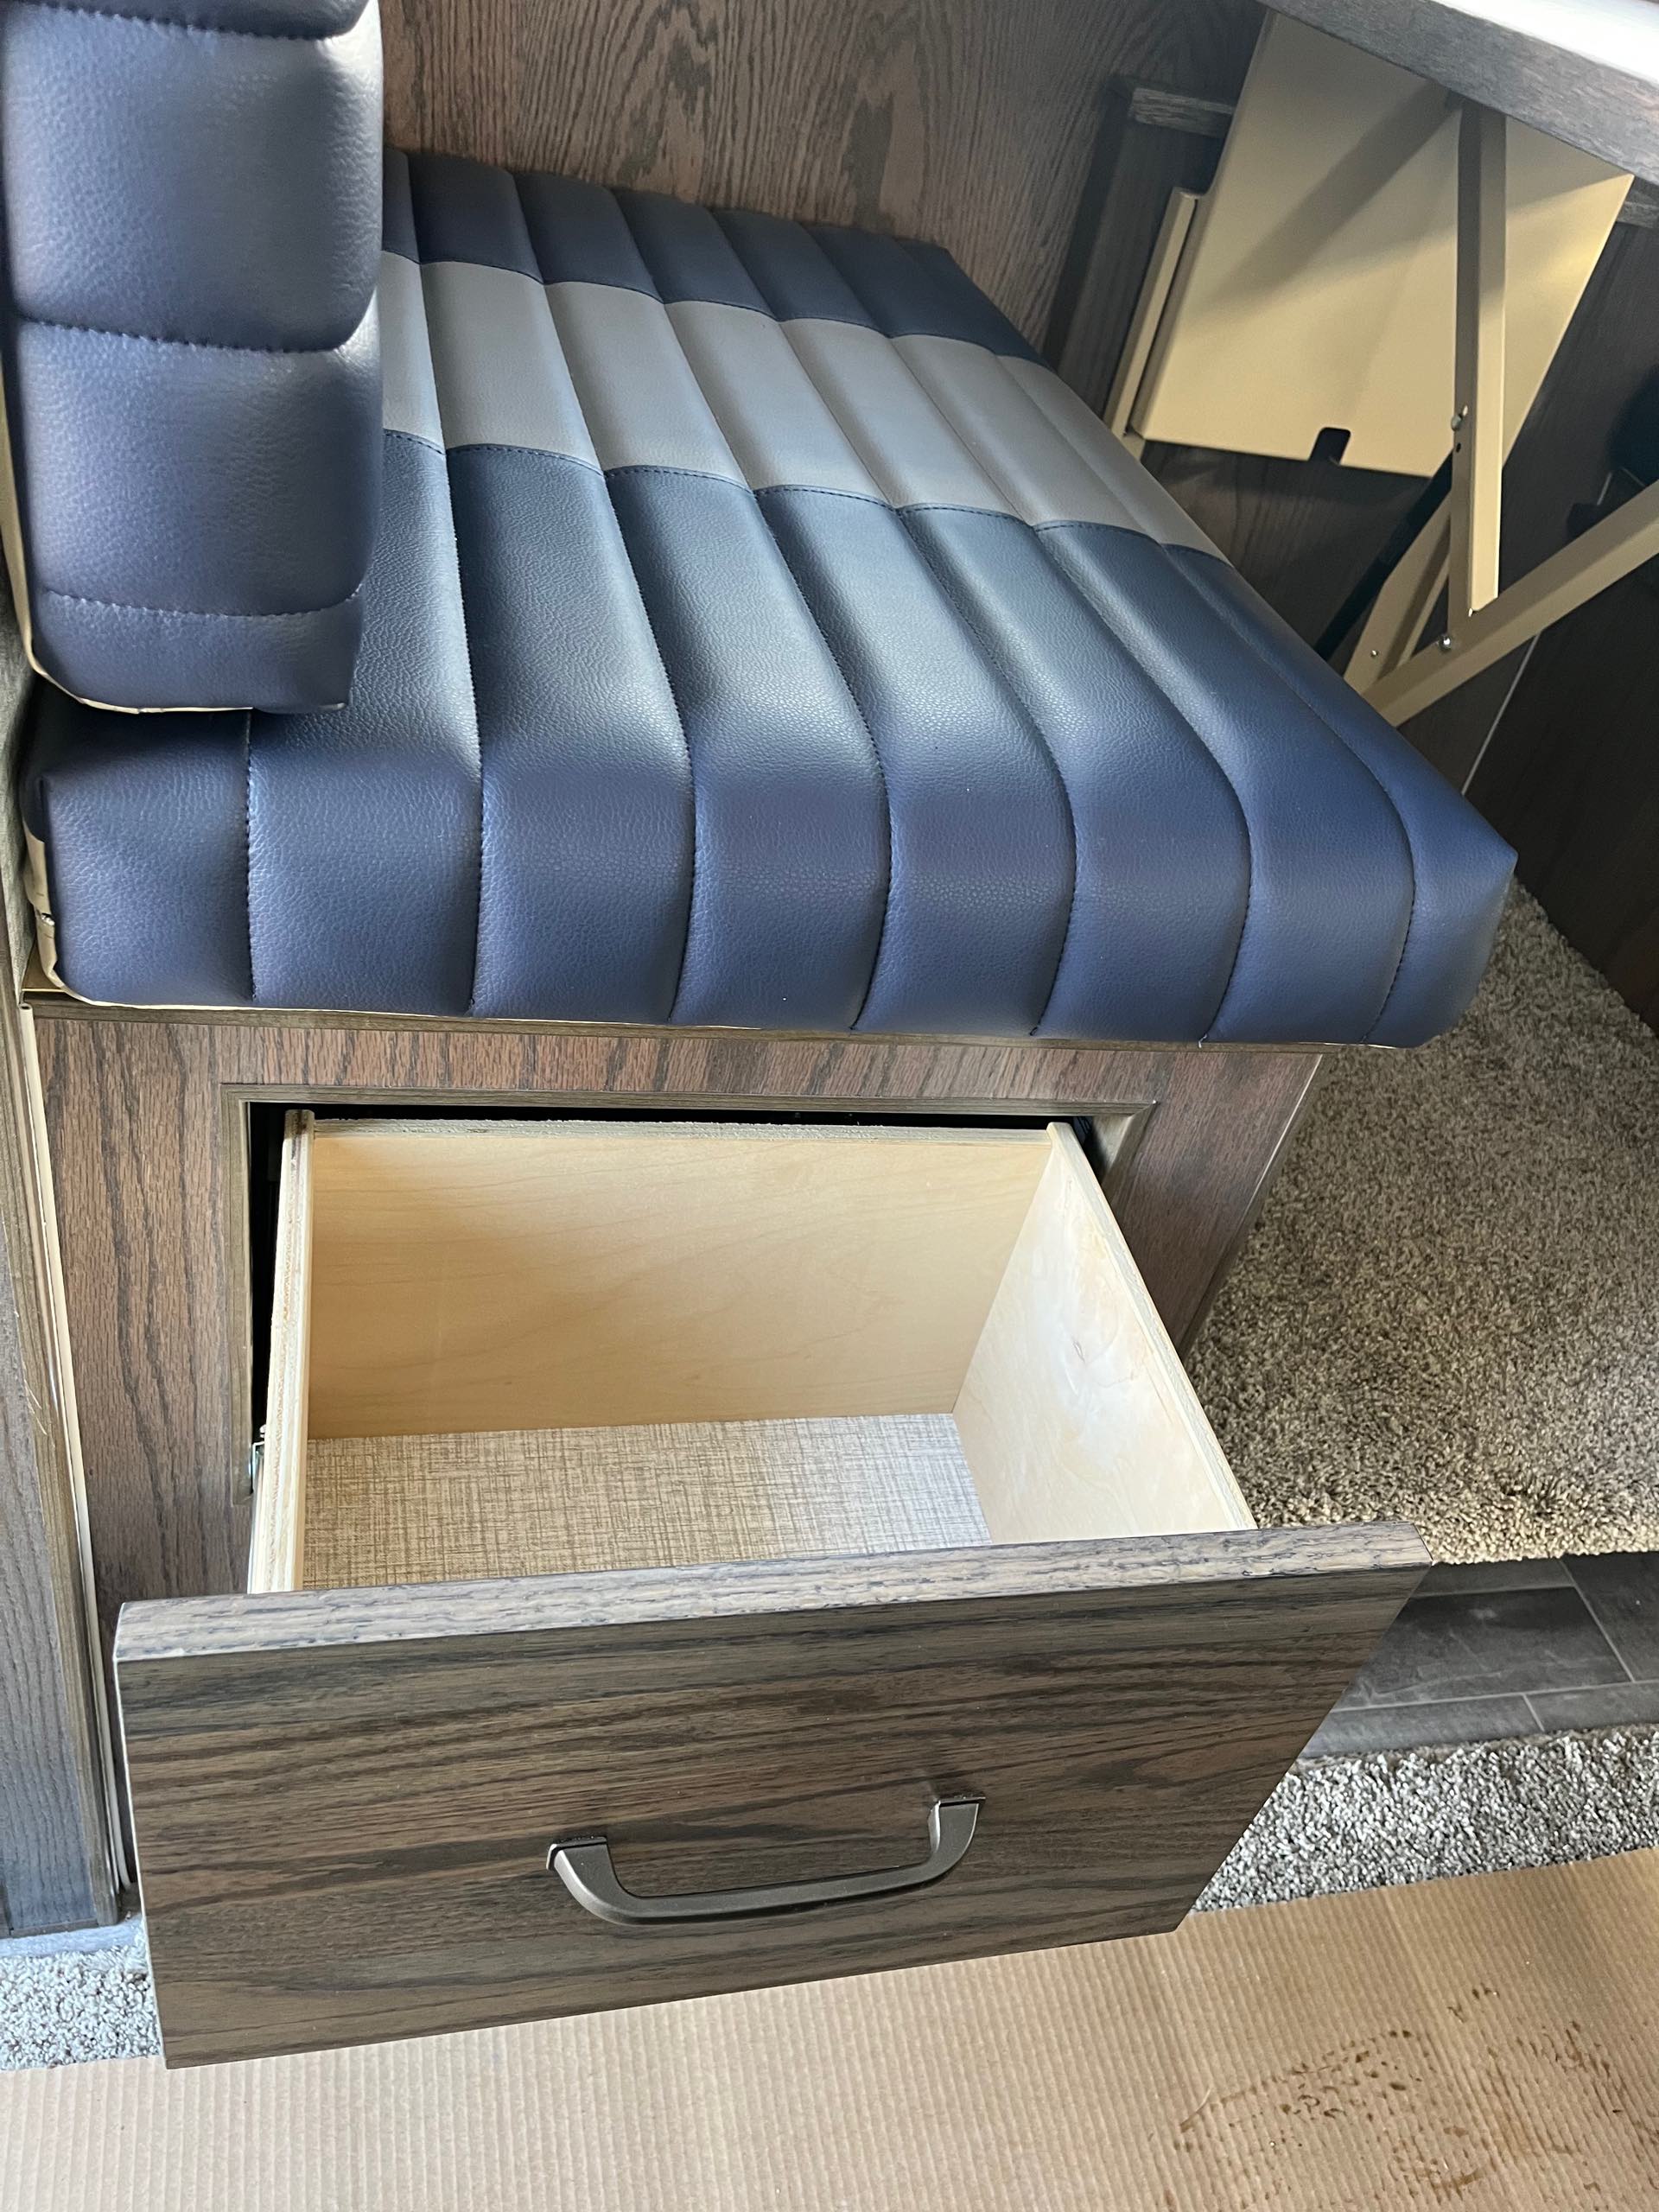 2023 Northern Lite Limited Edition 9-6LEWB Face-to-Face Dinette at Prosser's Premium RV Outlet